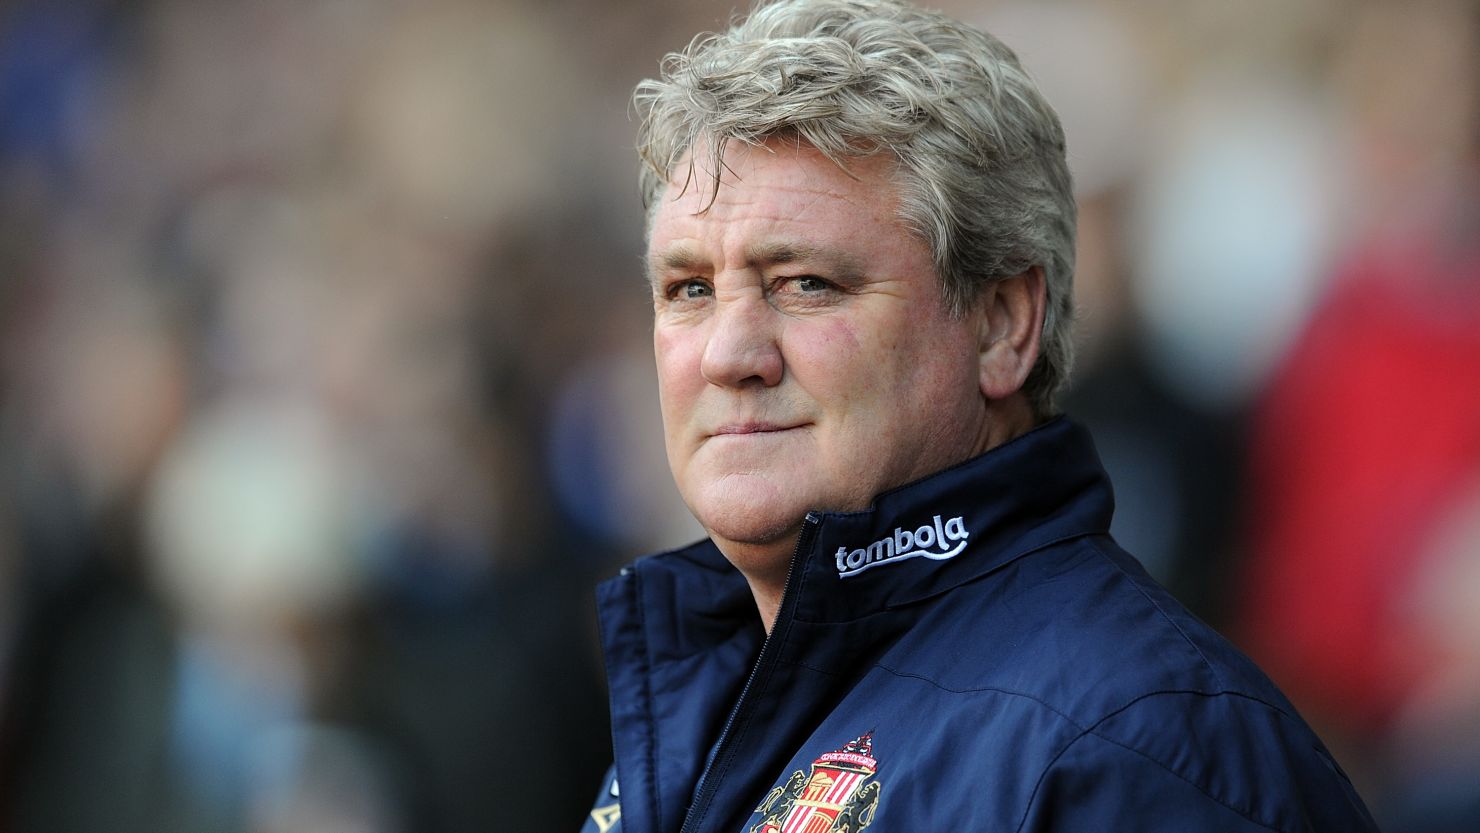 Steve Bruce has become the first Premier League manager to lose his job this season after Sunderland's poor recent form